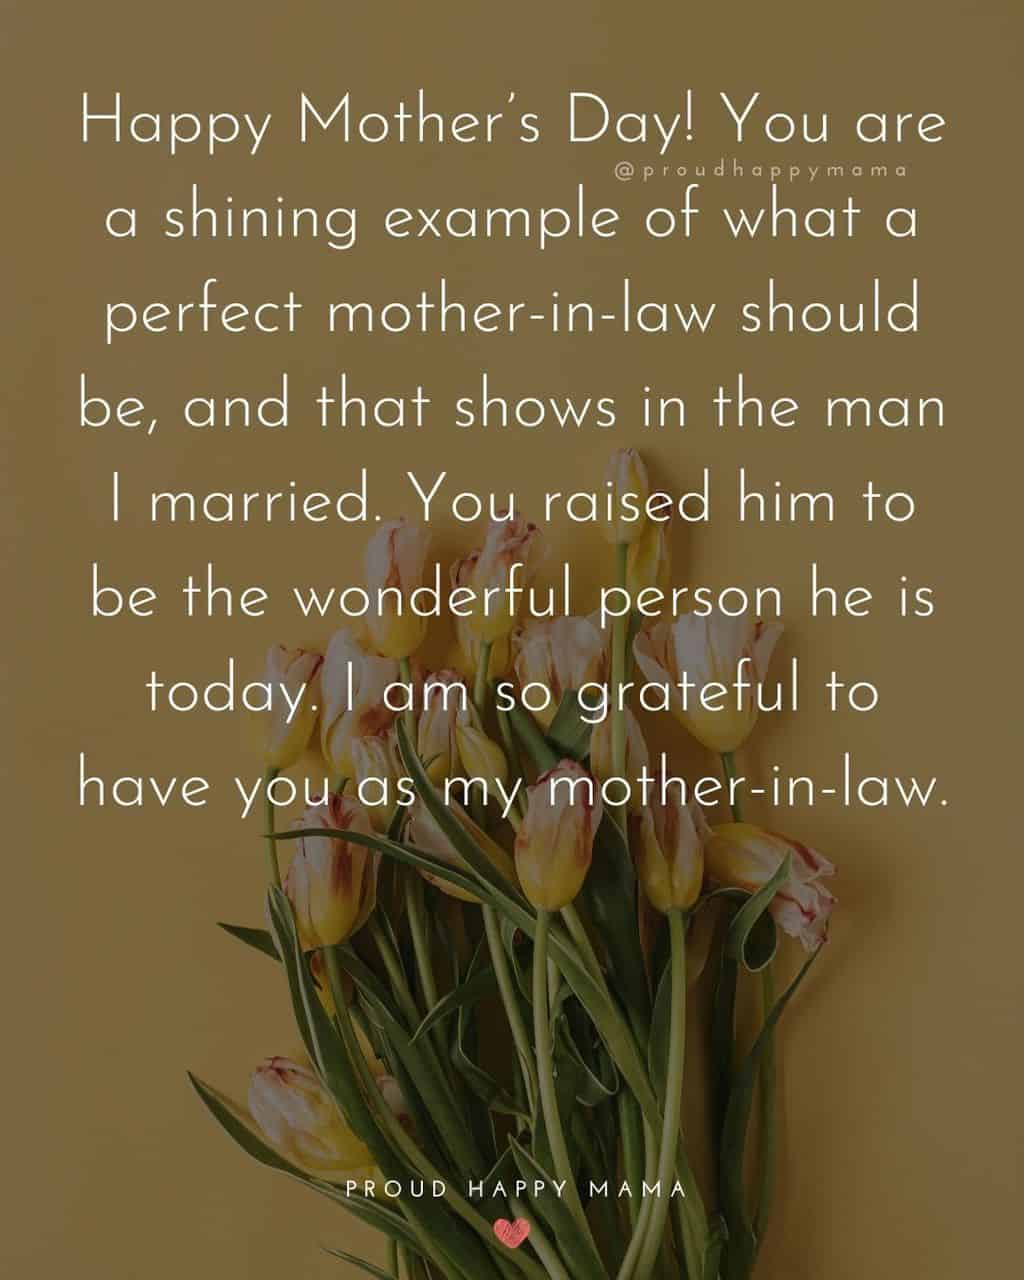 Happy Mothers Day Quotes For Mother In Law - Happy Mother’s Day! You are a shining example of what a perfect mother-in-law should be, 